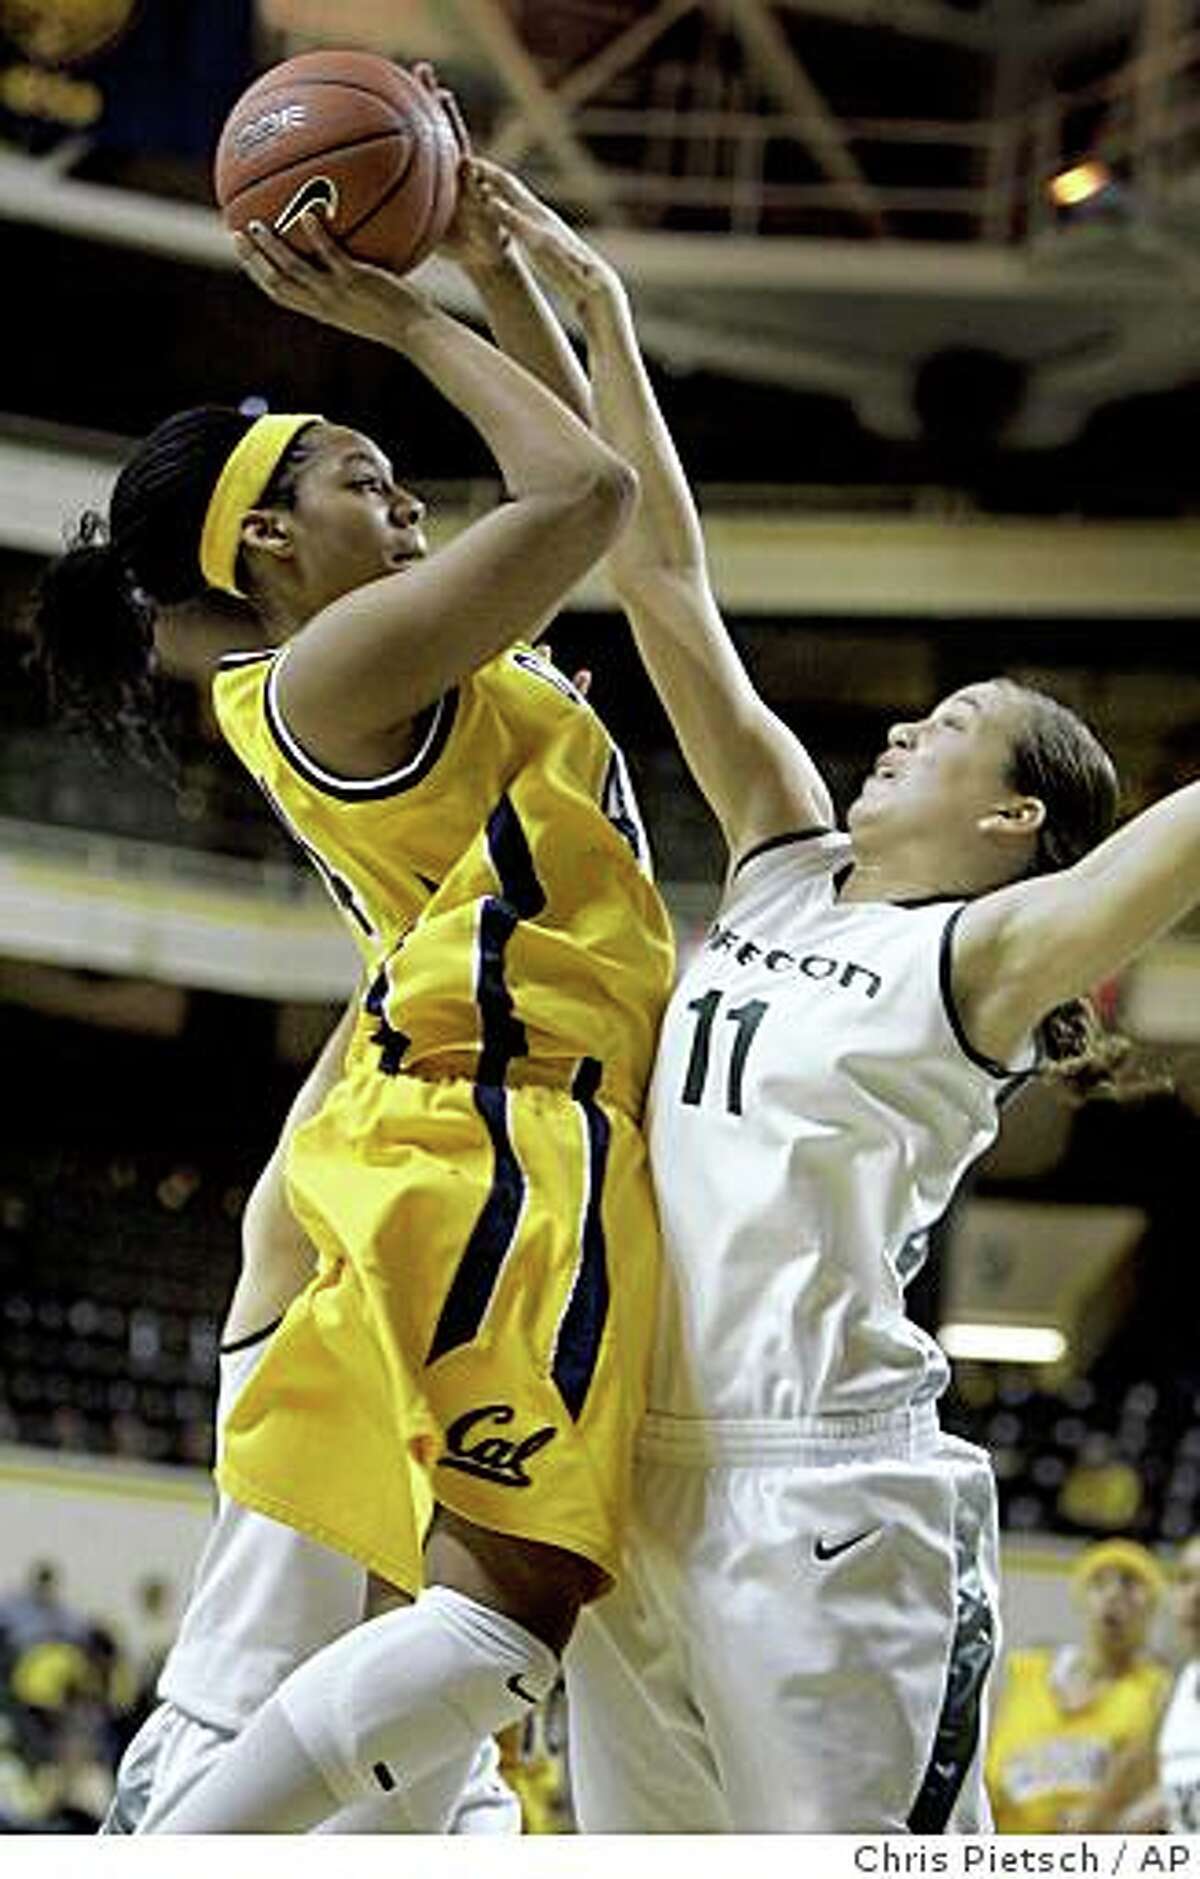 California's Ashley Walker, left, shots against Oregon's Amanda Johnson during the first half of an NCAA college basketball game in Eugene, Ore. Saturday Jan. 24, 2009. (AP Photo/Chris Pietsch)